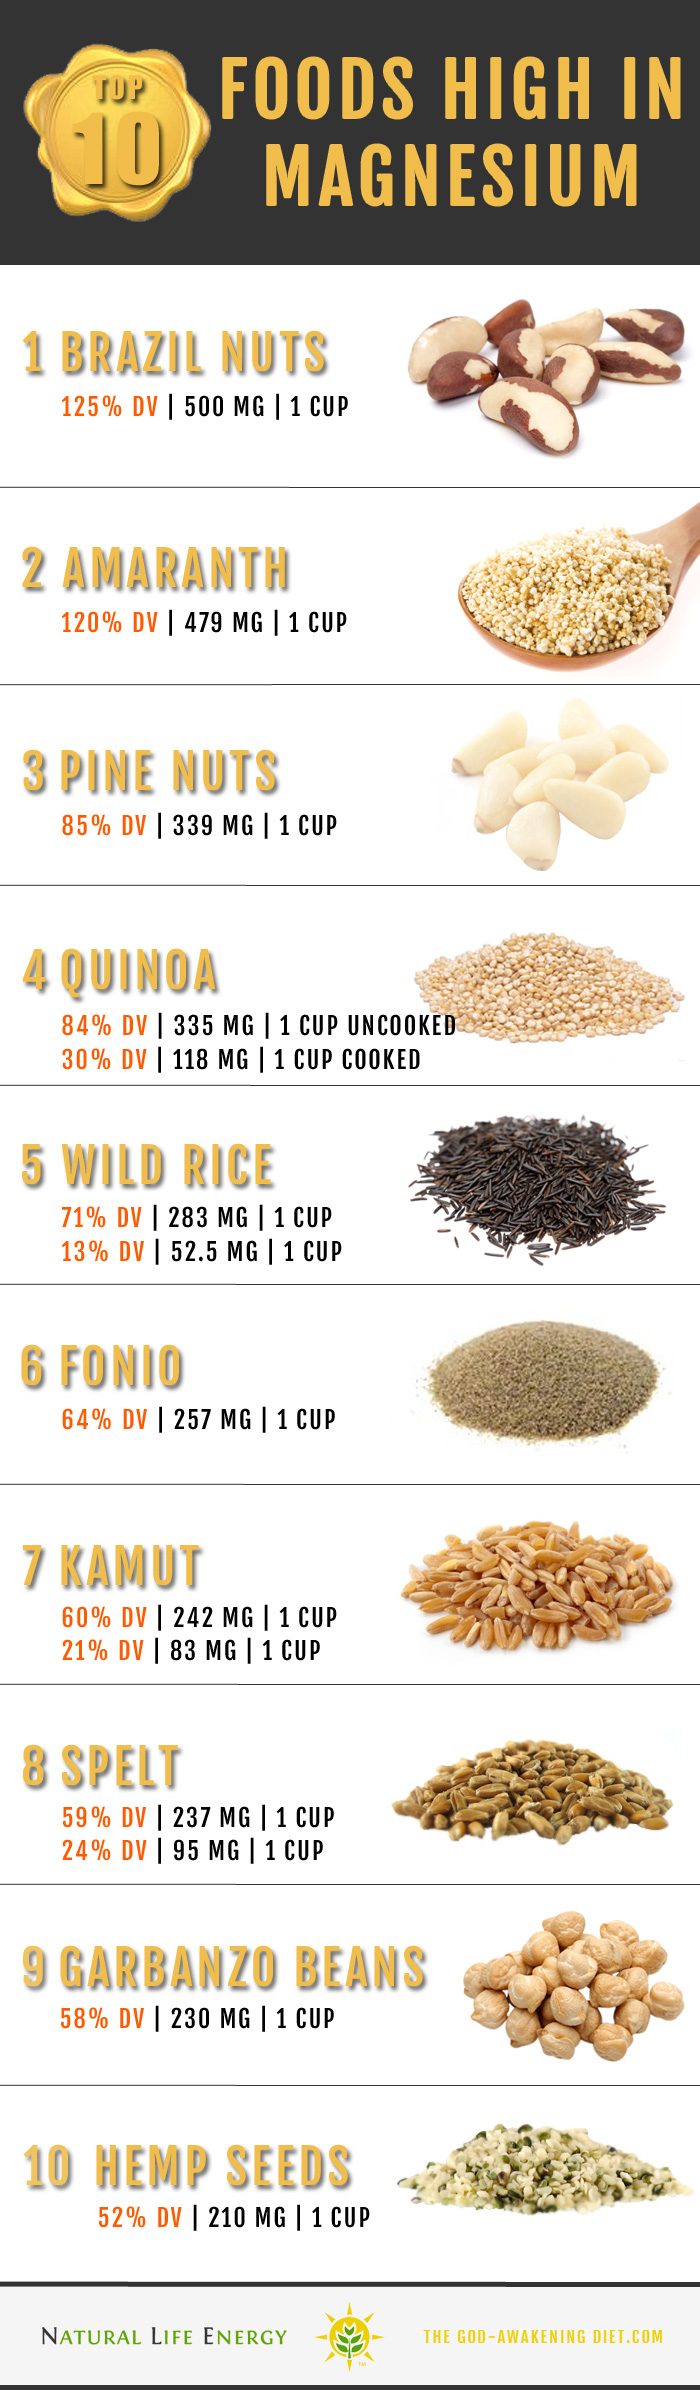 Foods High In Magnesium Infographic